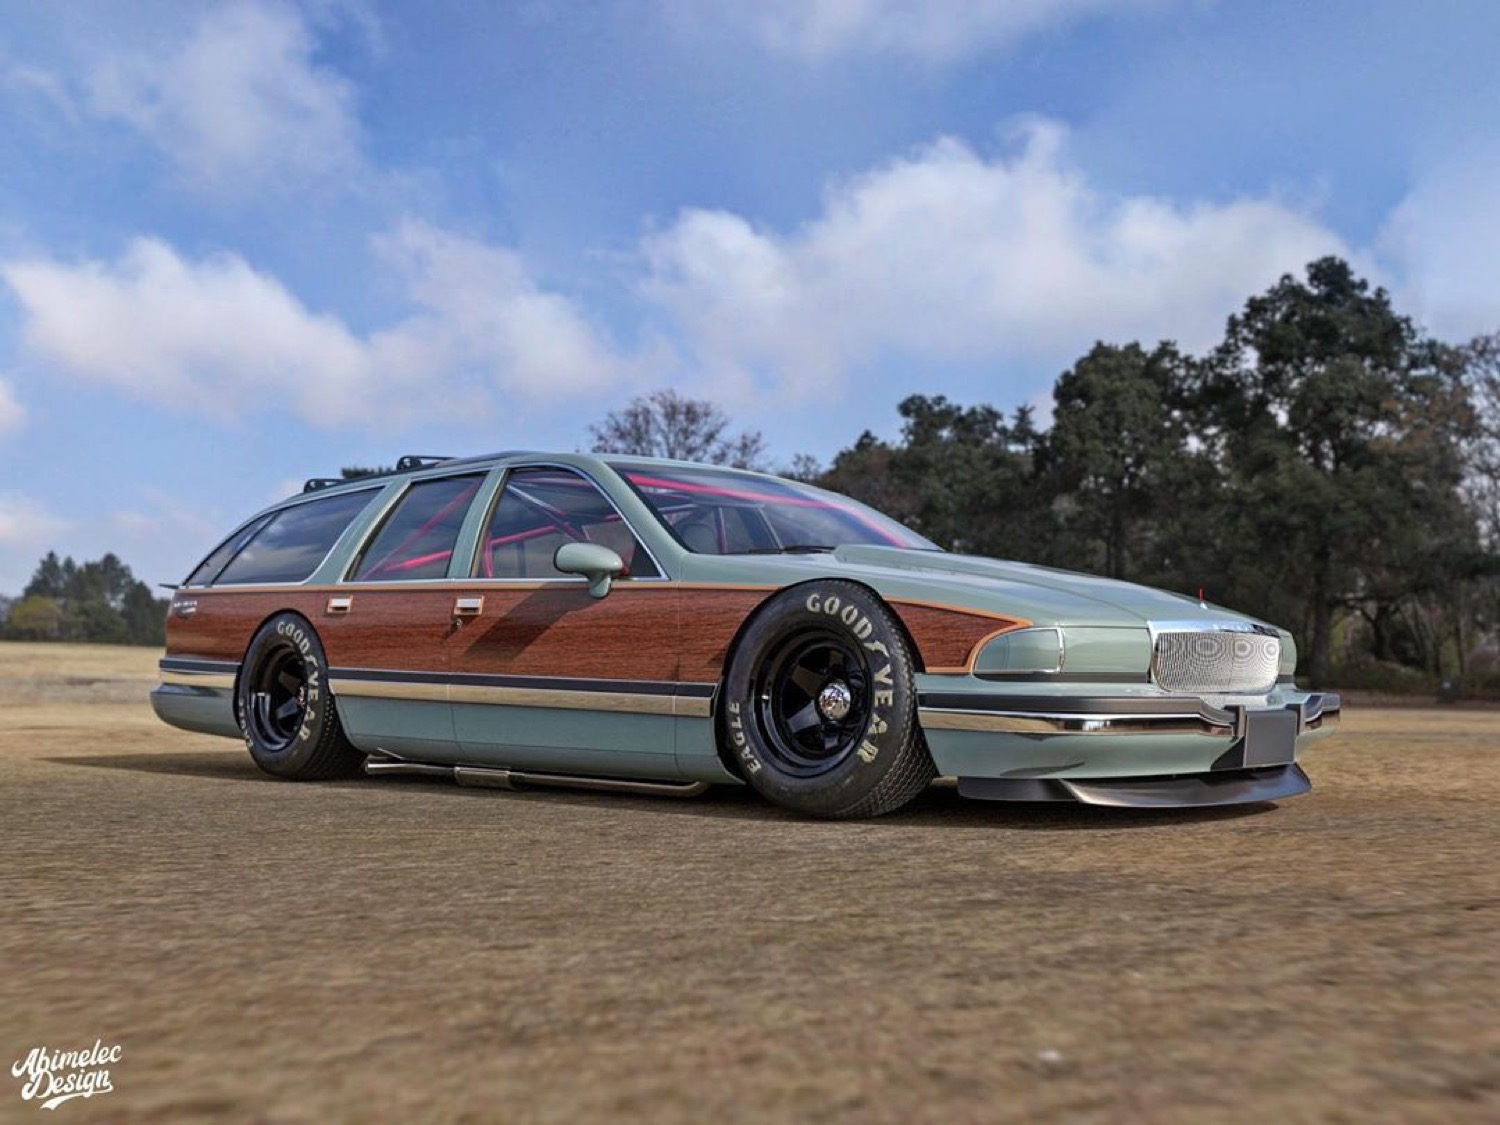 The Buick Roadmaster wagon is a total land yacht, but with the right upgrad...